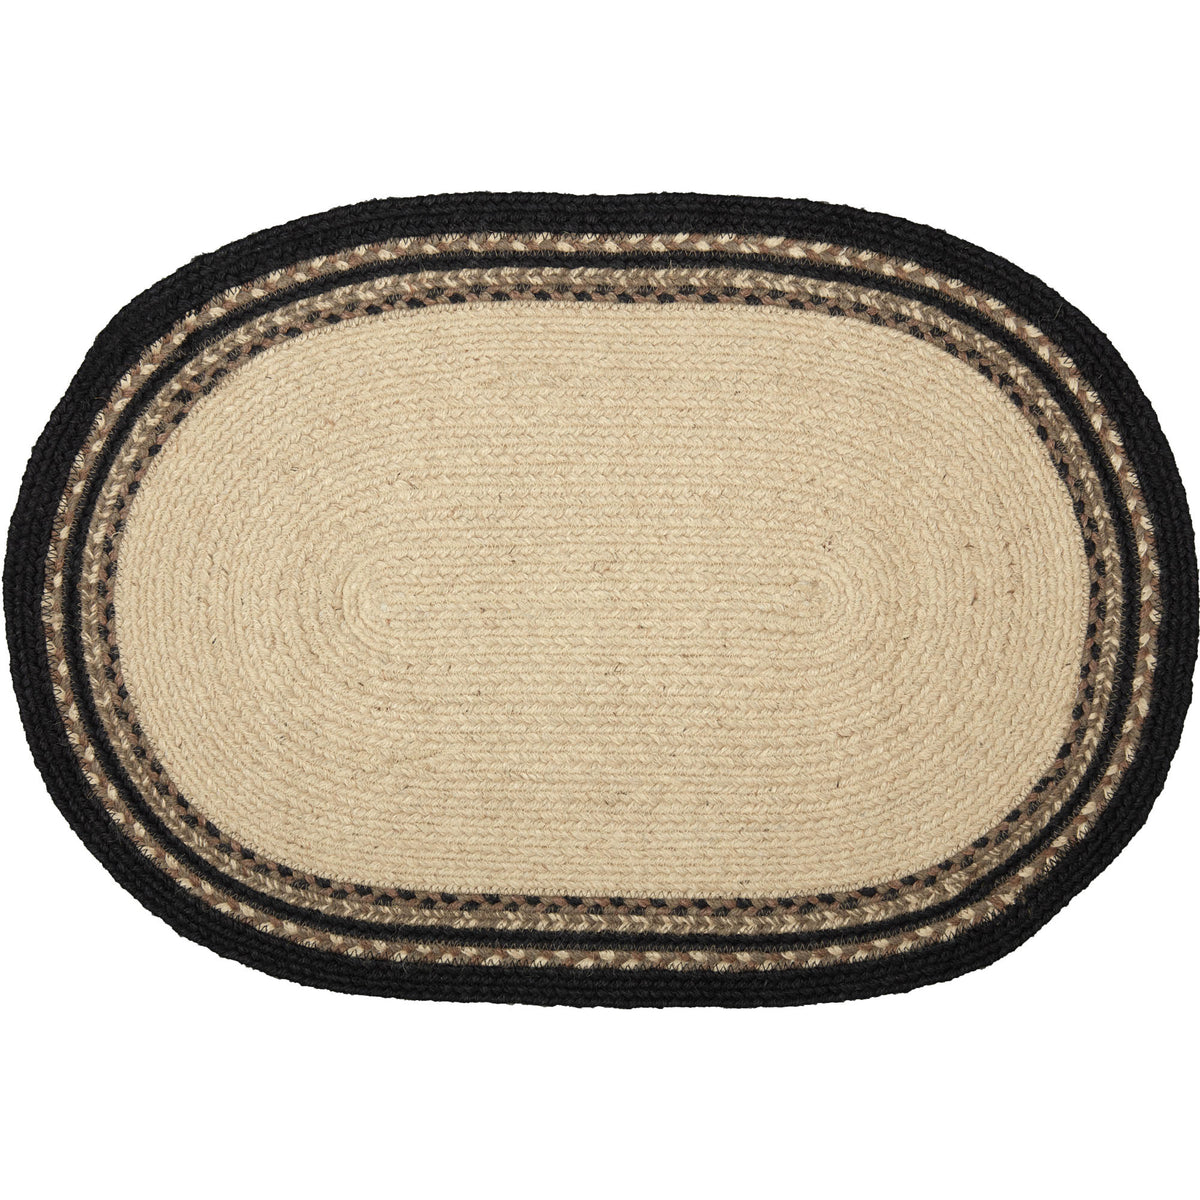 April & Olive Sawyer Mill Charcoal Pig Jute Rug Oval w/ Pad 20x30 By VHC Brands